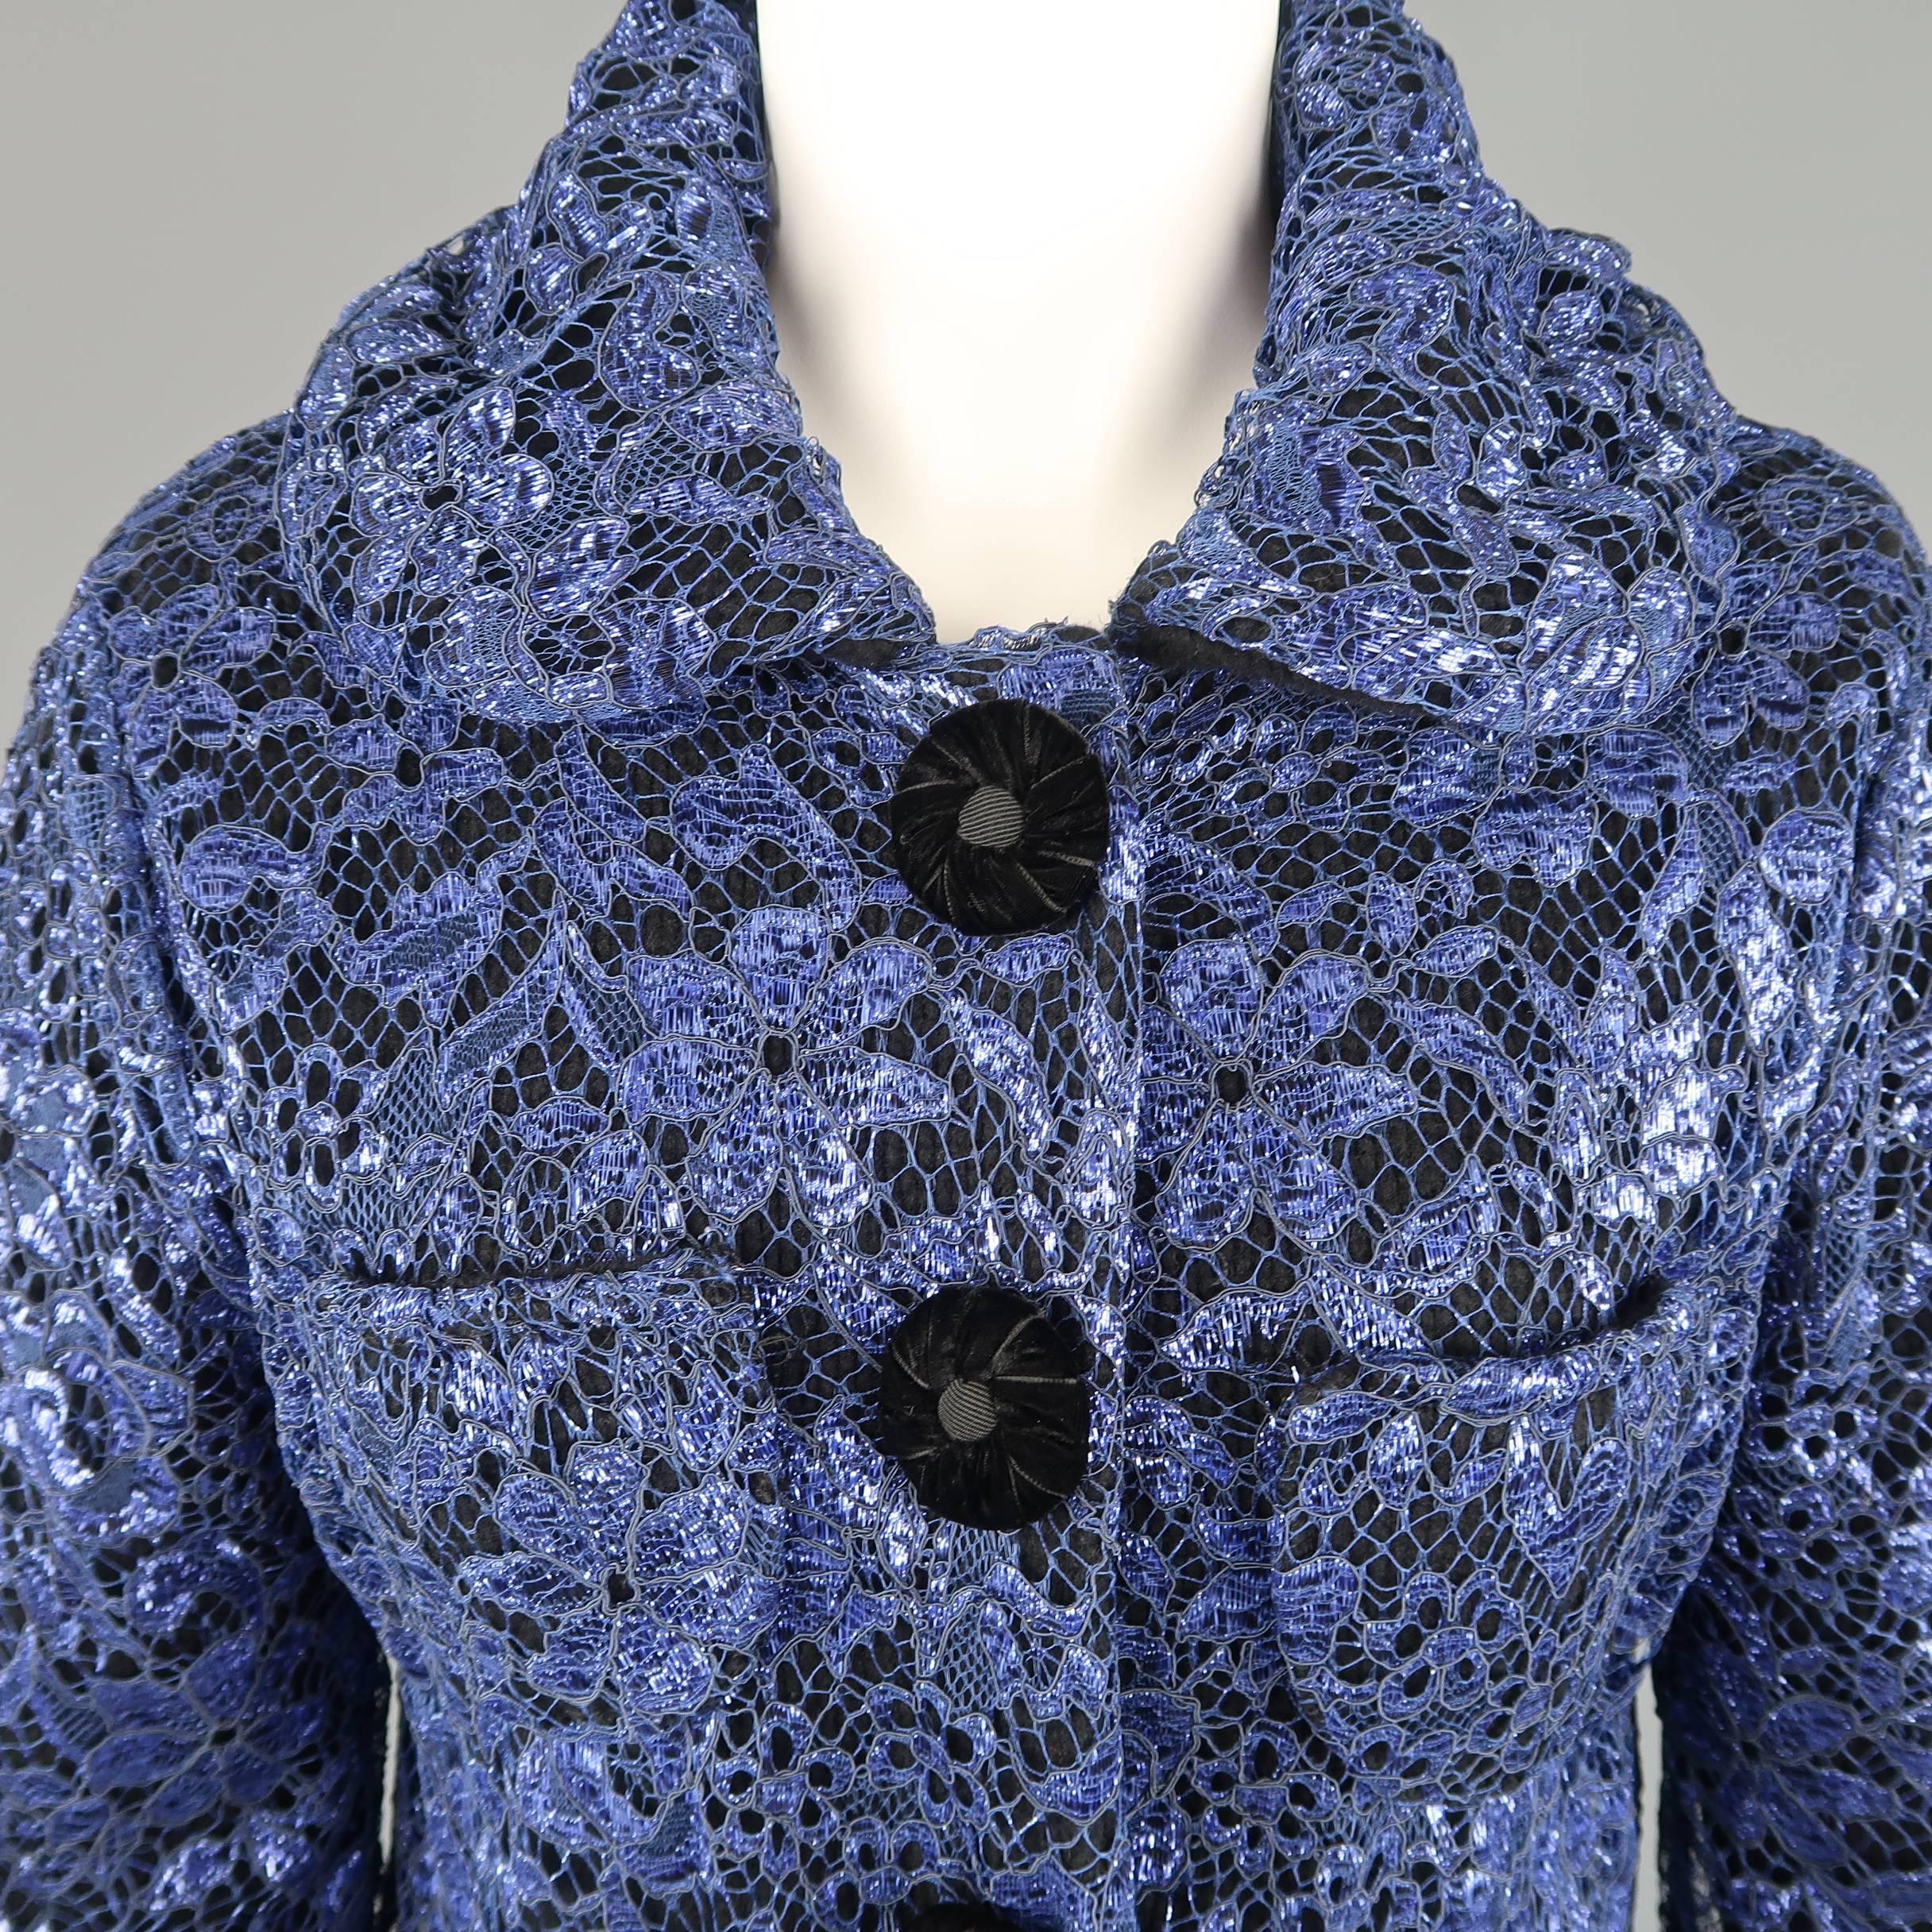 MARC JACOBS jacket comes in black cashmere knit with a metallic blue lace overlay and features a round collar, retro silhouette, patch pockets, and four snap closure with black velvet buttons. Made in Italy.
 
Excellent Pre-Owned Condition.
Marked: